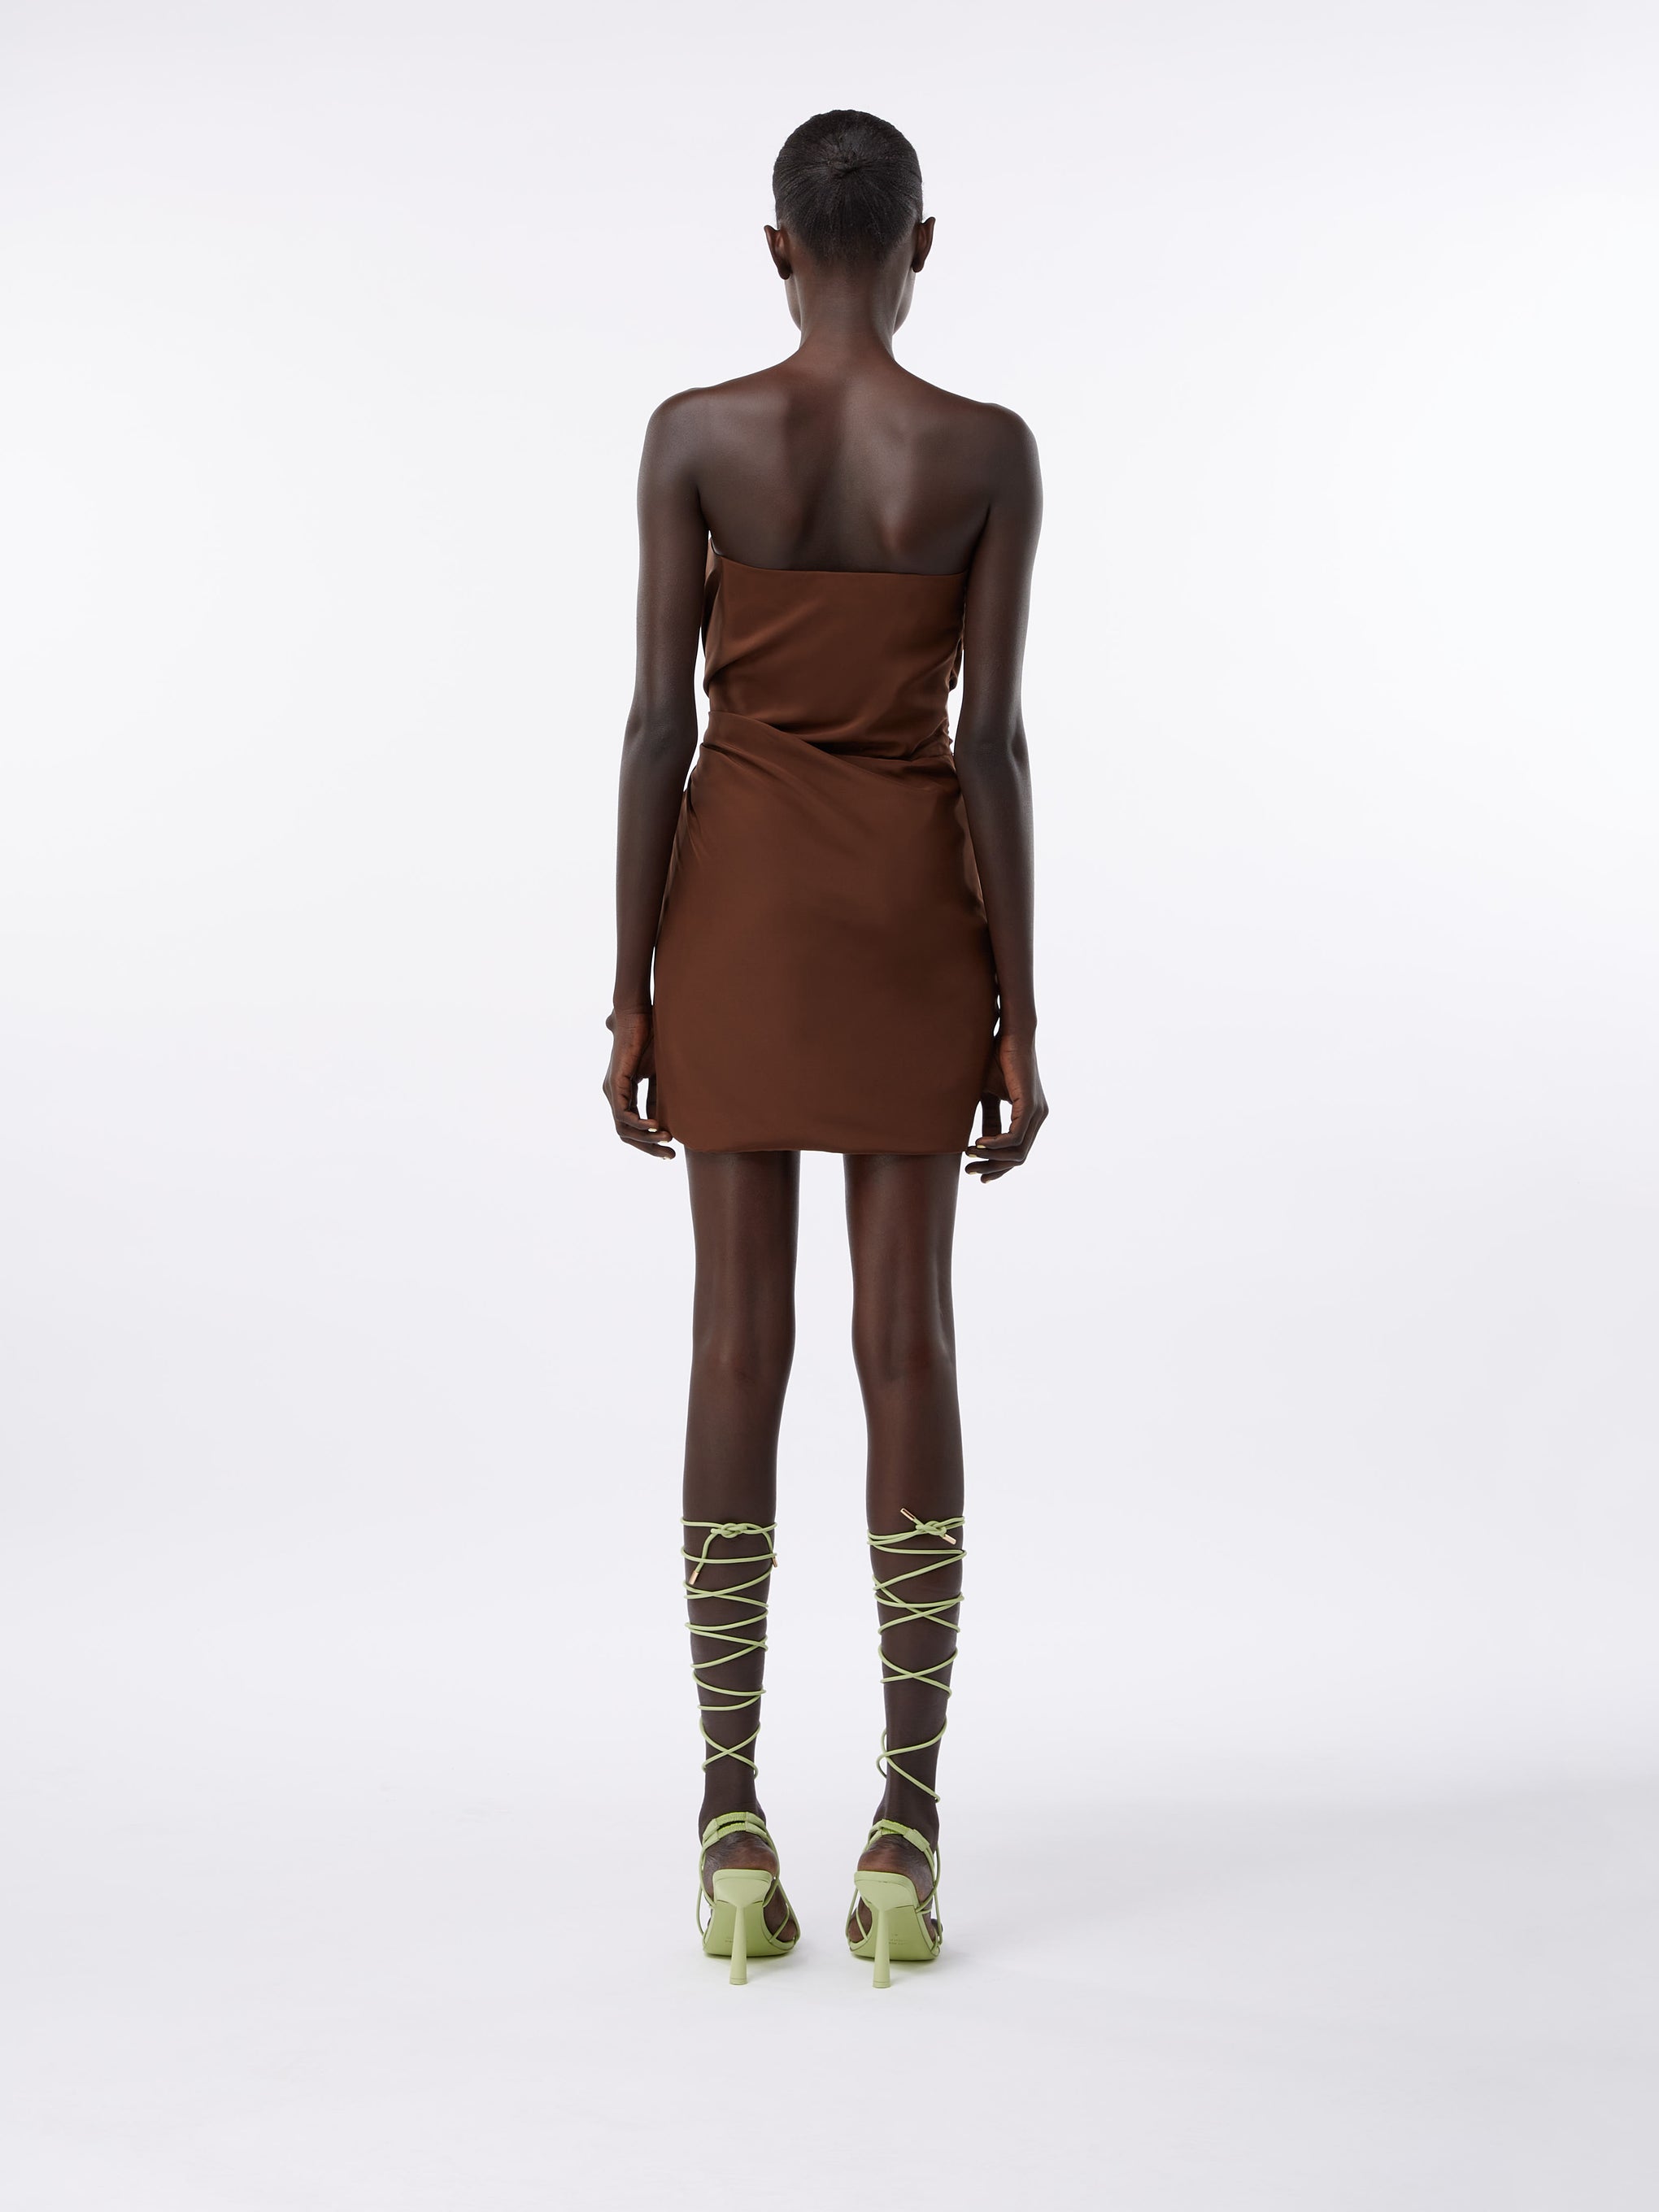 Gauge81 Hirata Mini Dress in Chocolate available at TNT The New Trend Australia